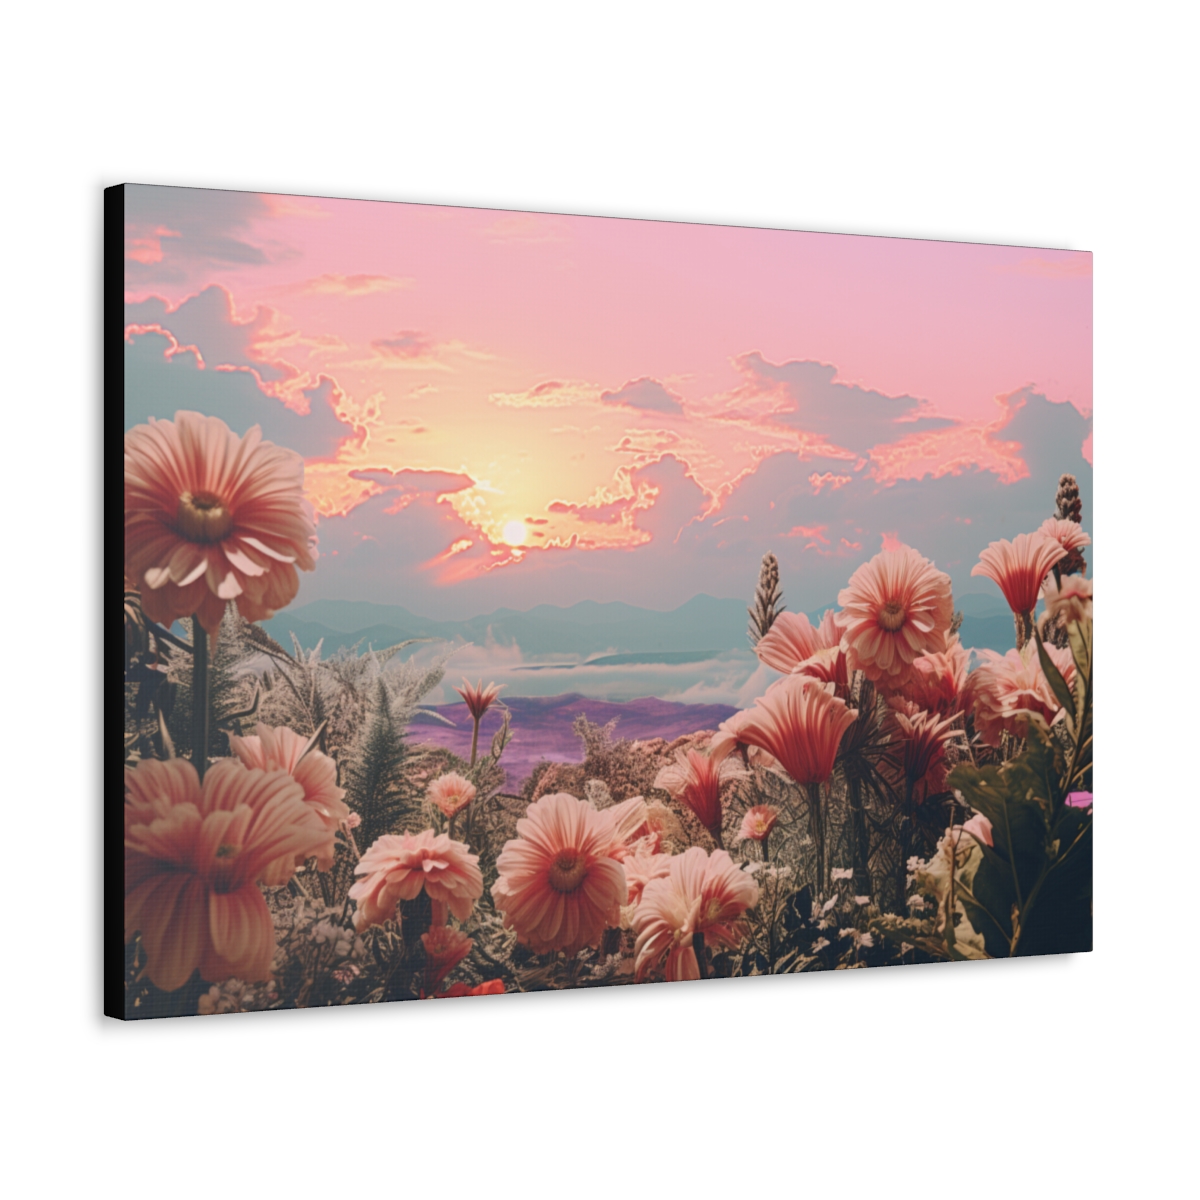 Ethereal Nature Sun Art: Floral Mornings